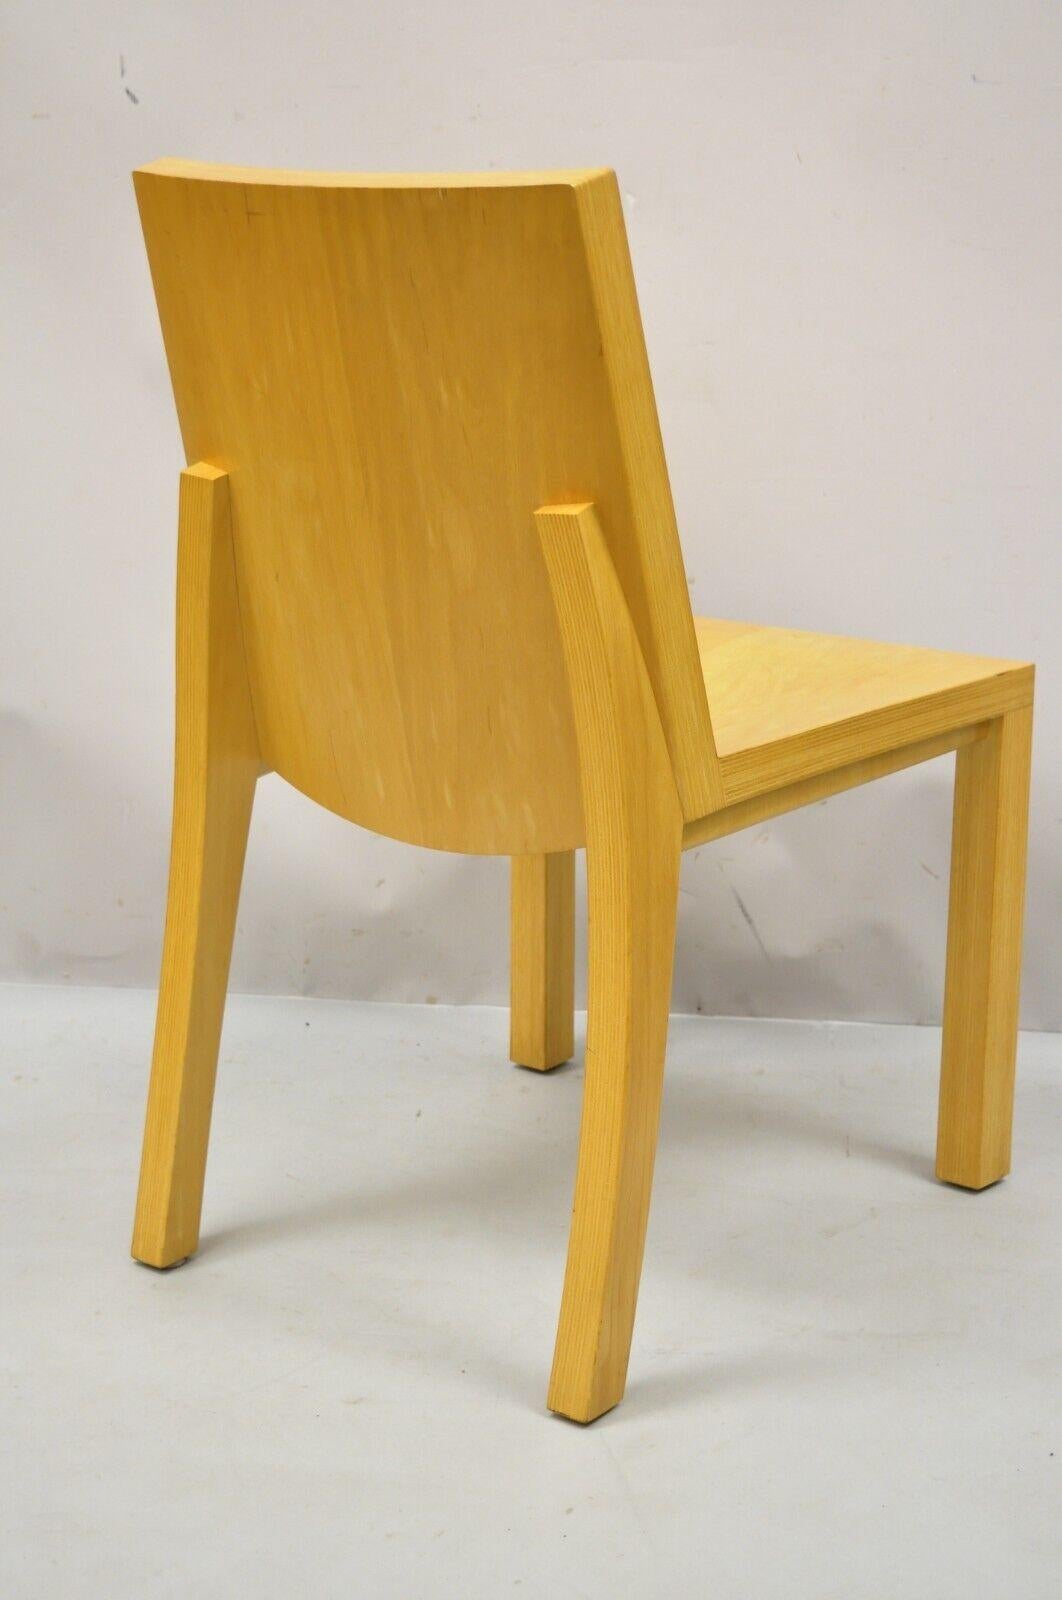 20th Century Modern Stacked Laminated Birch Beechwood Laminate Dining Chair, Set of 4 For Sale